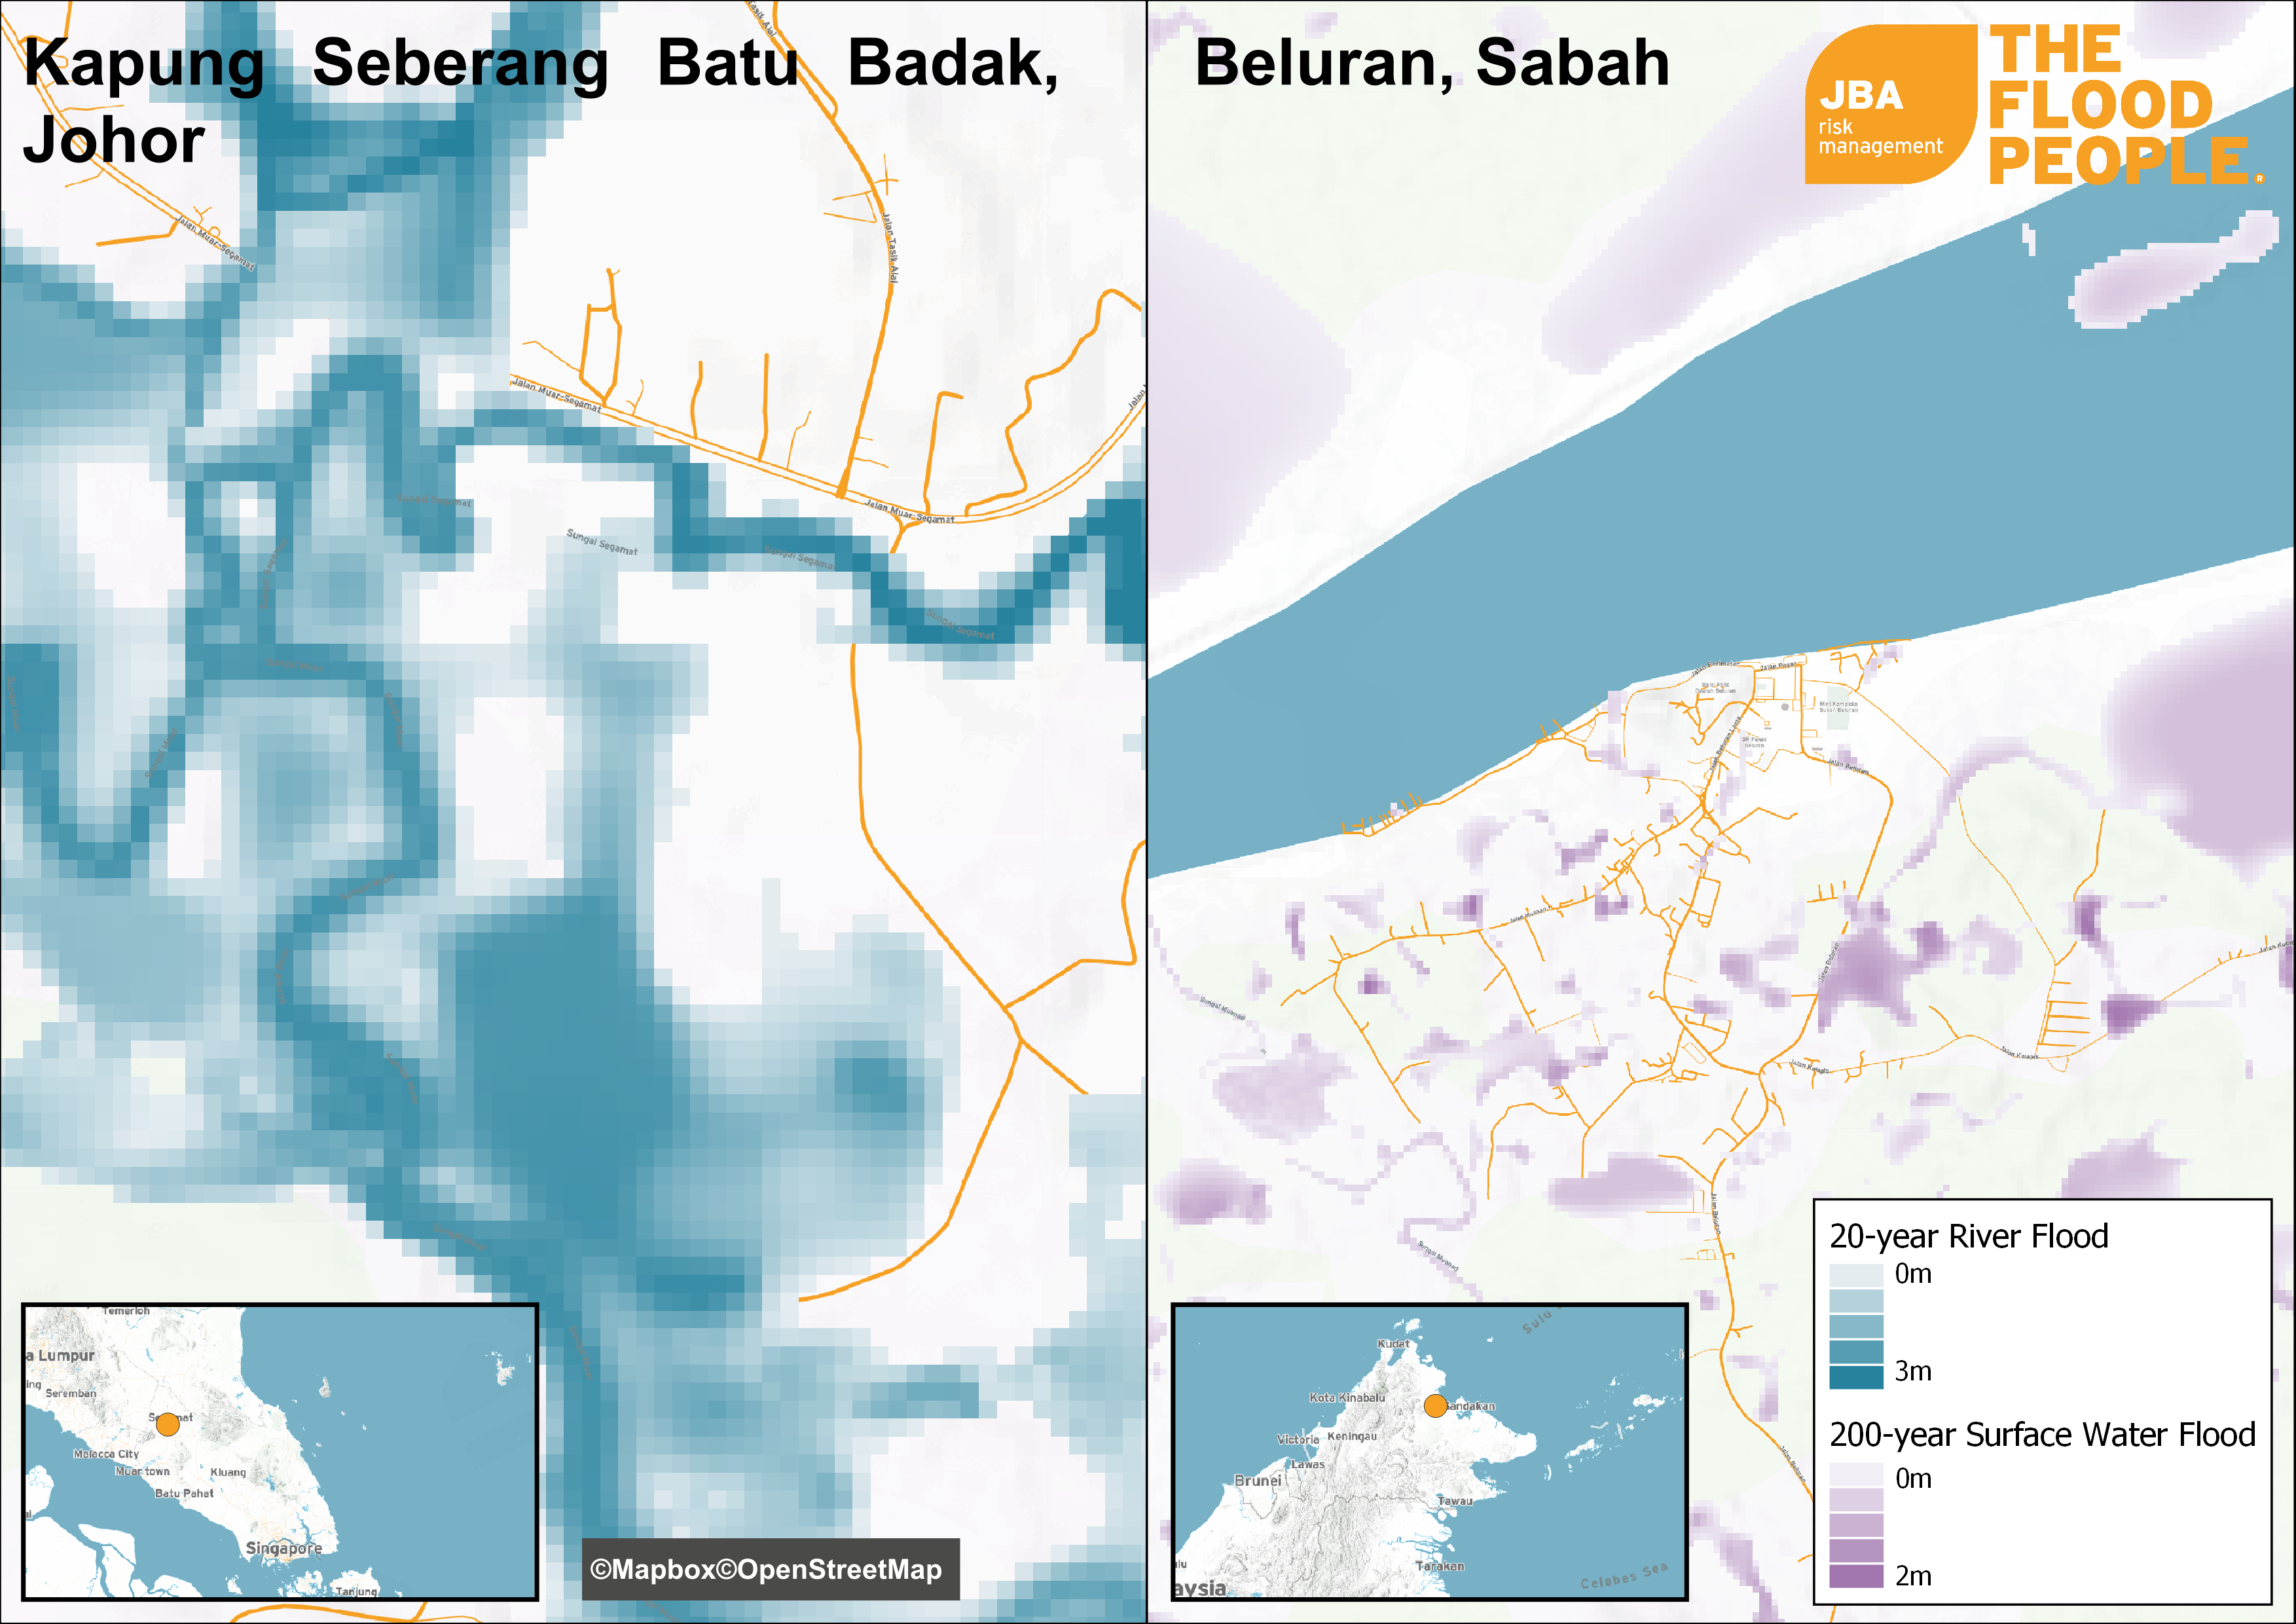 Affected areas in Johor and Sabah